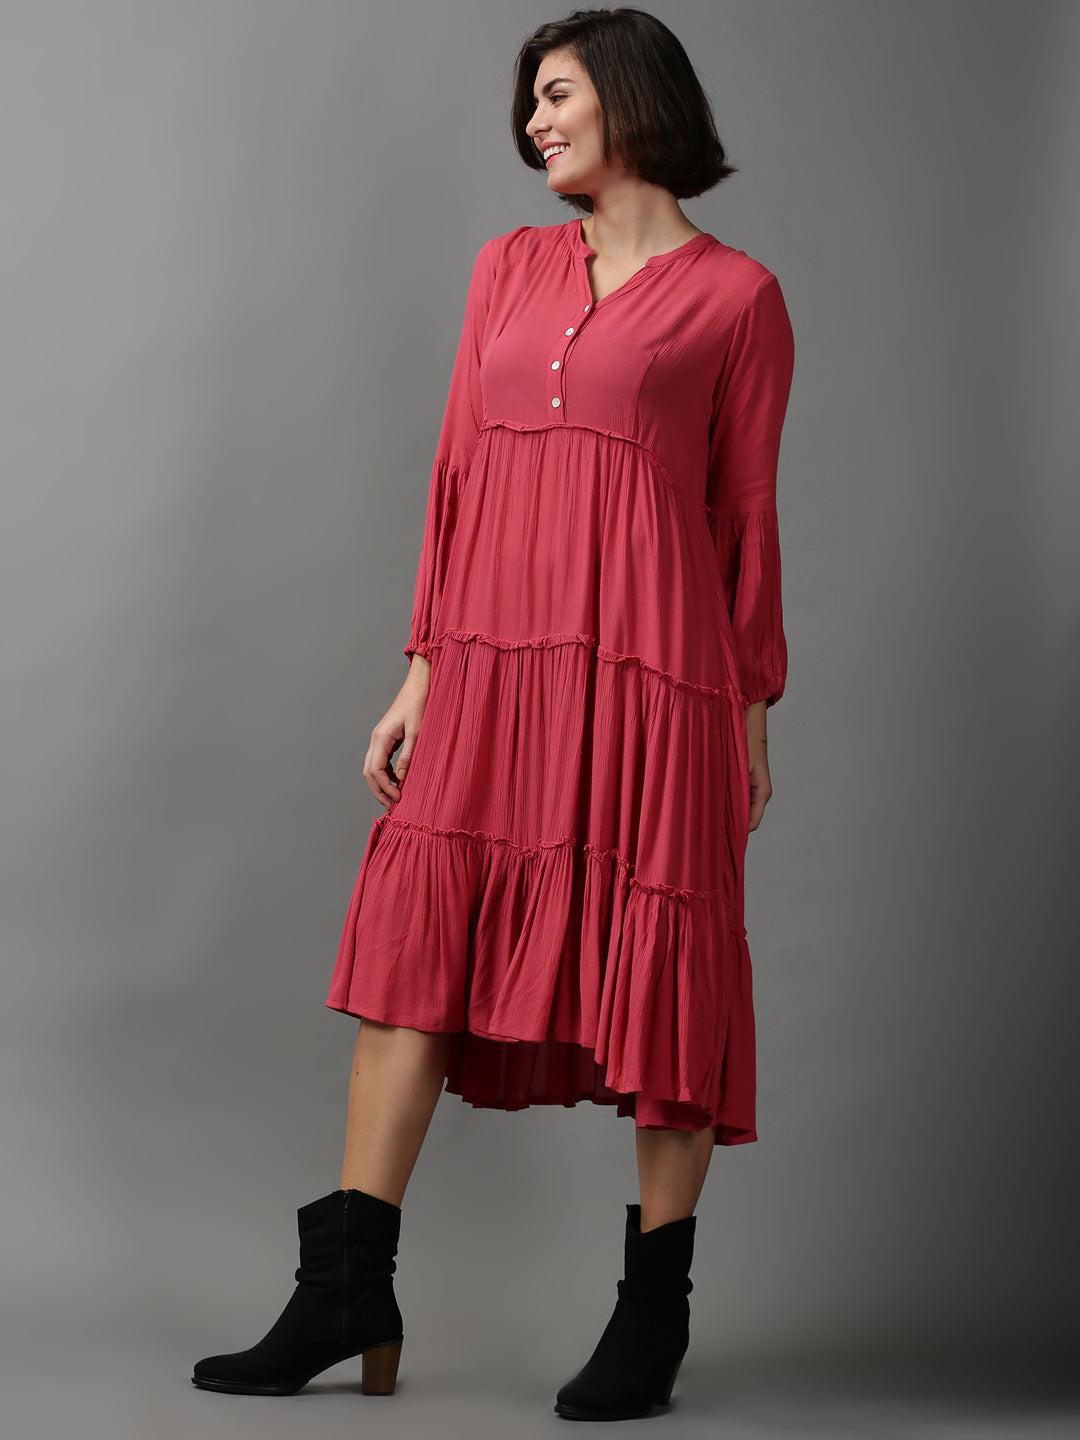 Women's Pink Solid Fit and Flare Dress